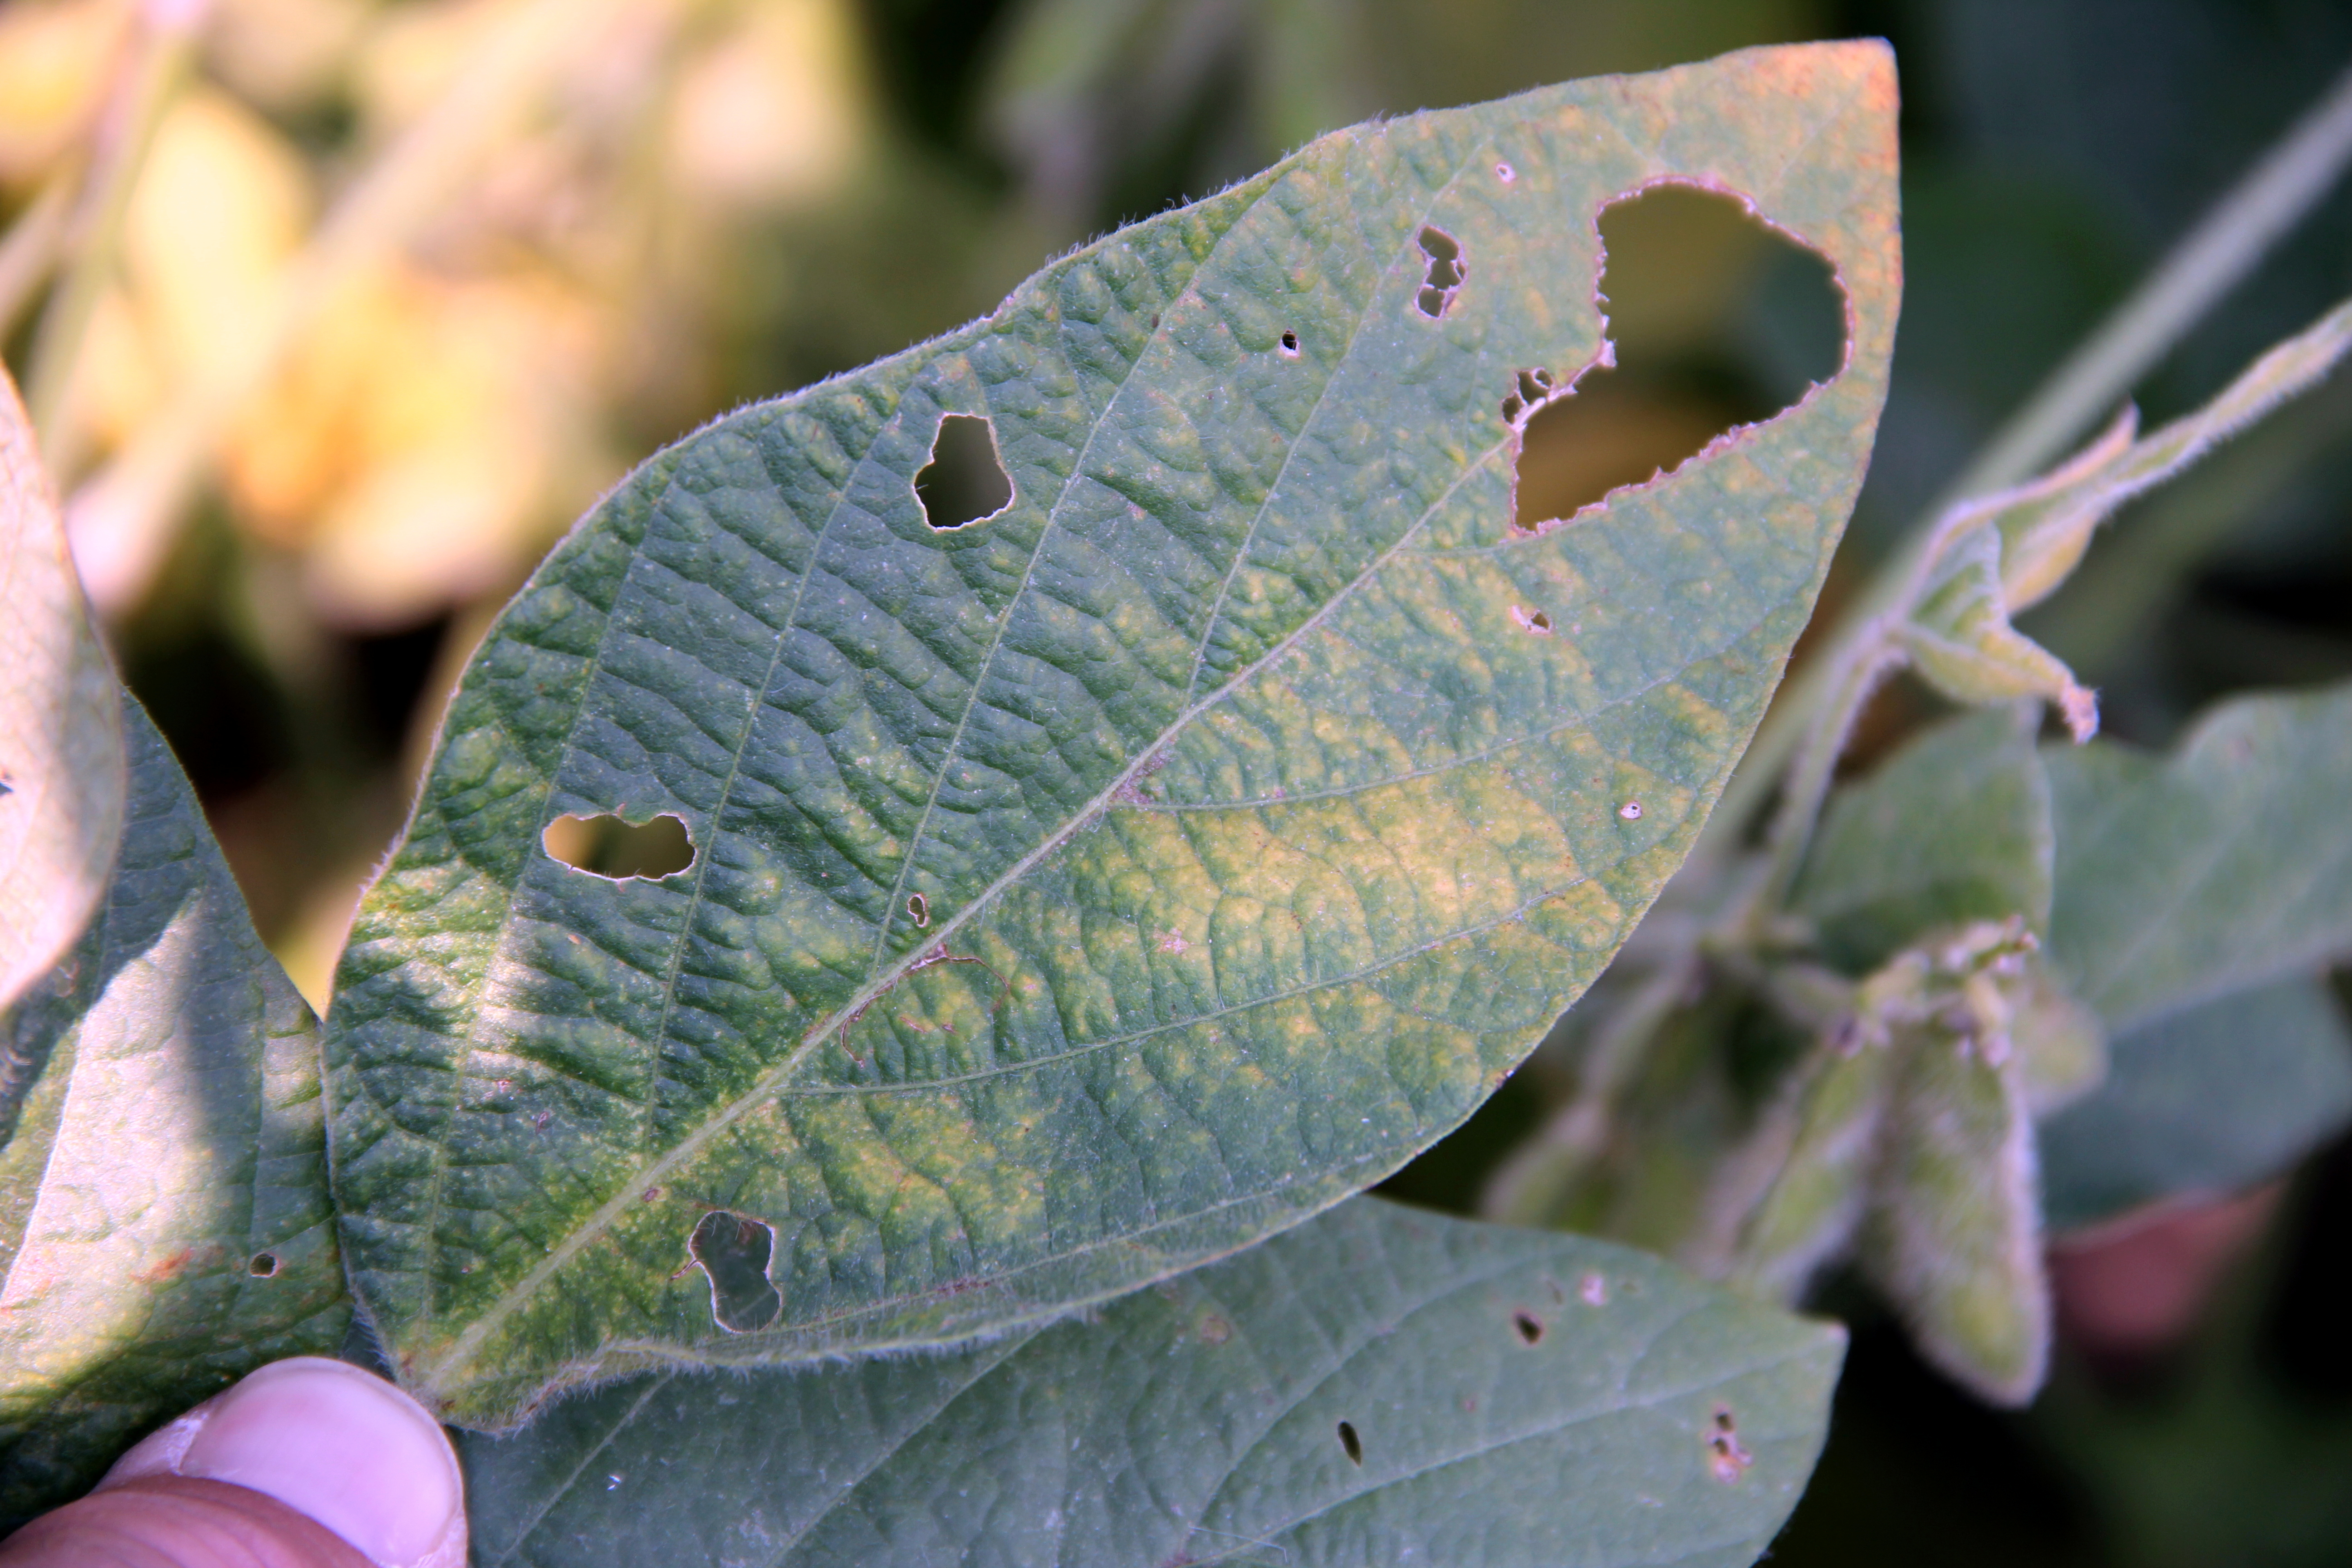 Soybean leaf with symptoms of Soybean dwarf virus infection.